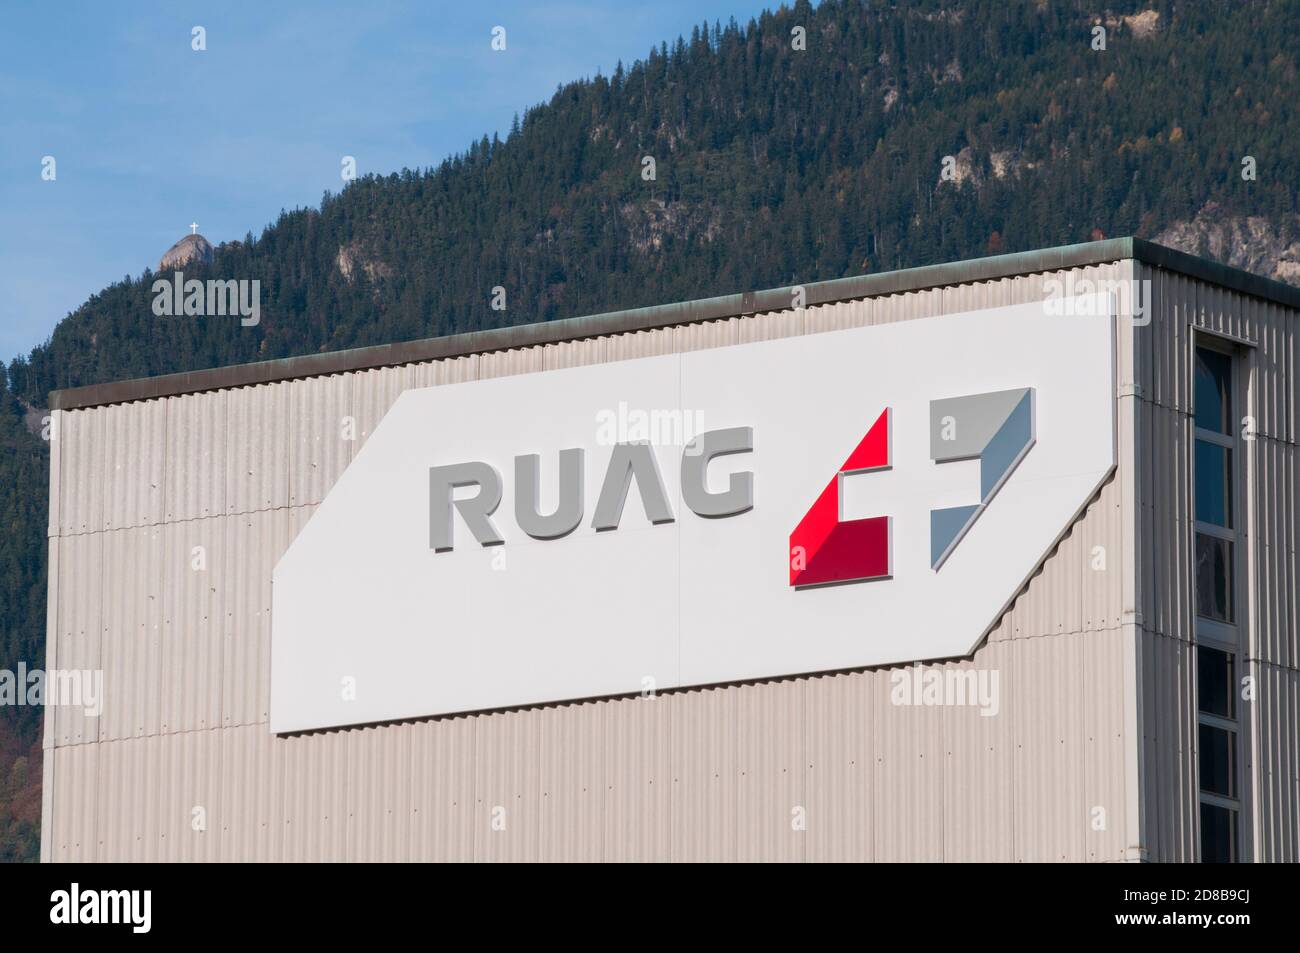 Altdorf, Uri, Switzerland - 25th October 2020 : Ruag logo sign hanging on a building facade in Altdorf. is a Swiss company specializing in aerospace e Stock Photo